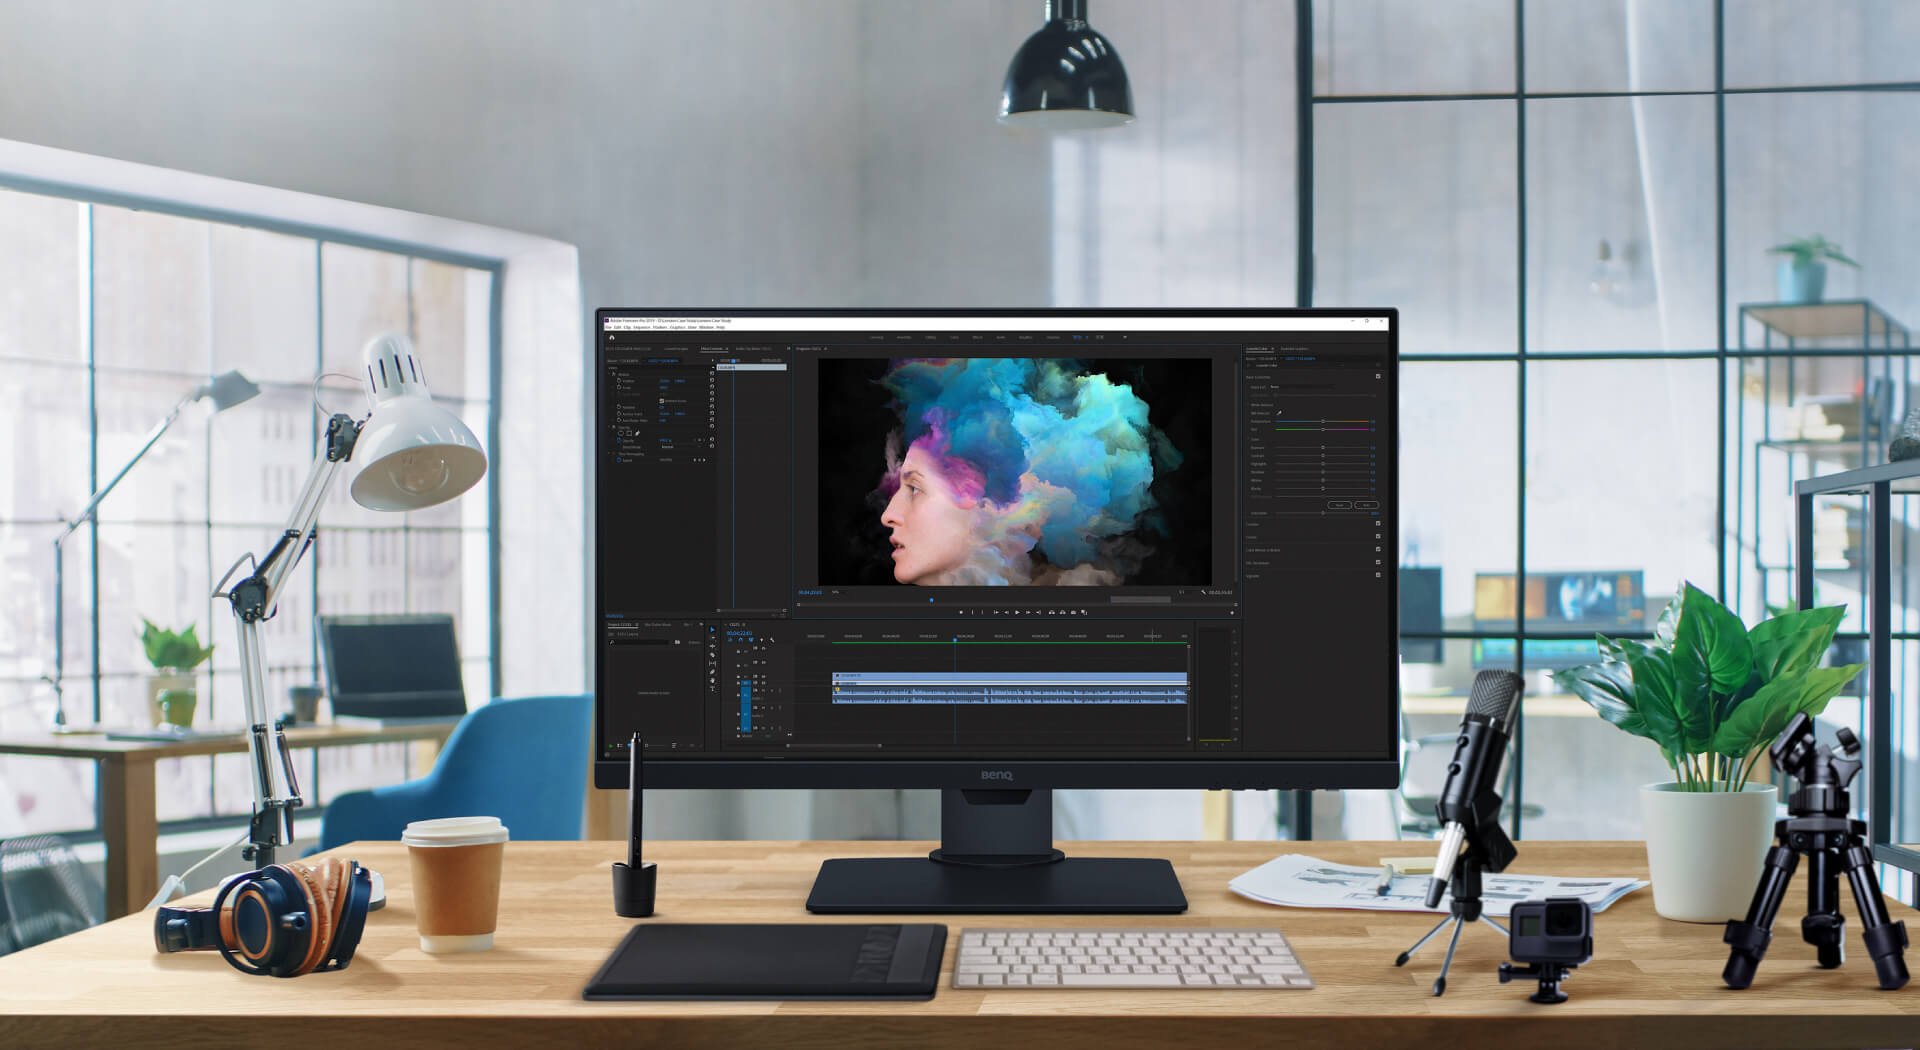 BenQ PD2705Q is HDR10-compatible for videographers to preview HDR video content during the editing process, ensuring desirable outcomes for their final output. 